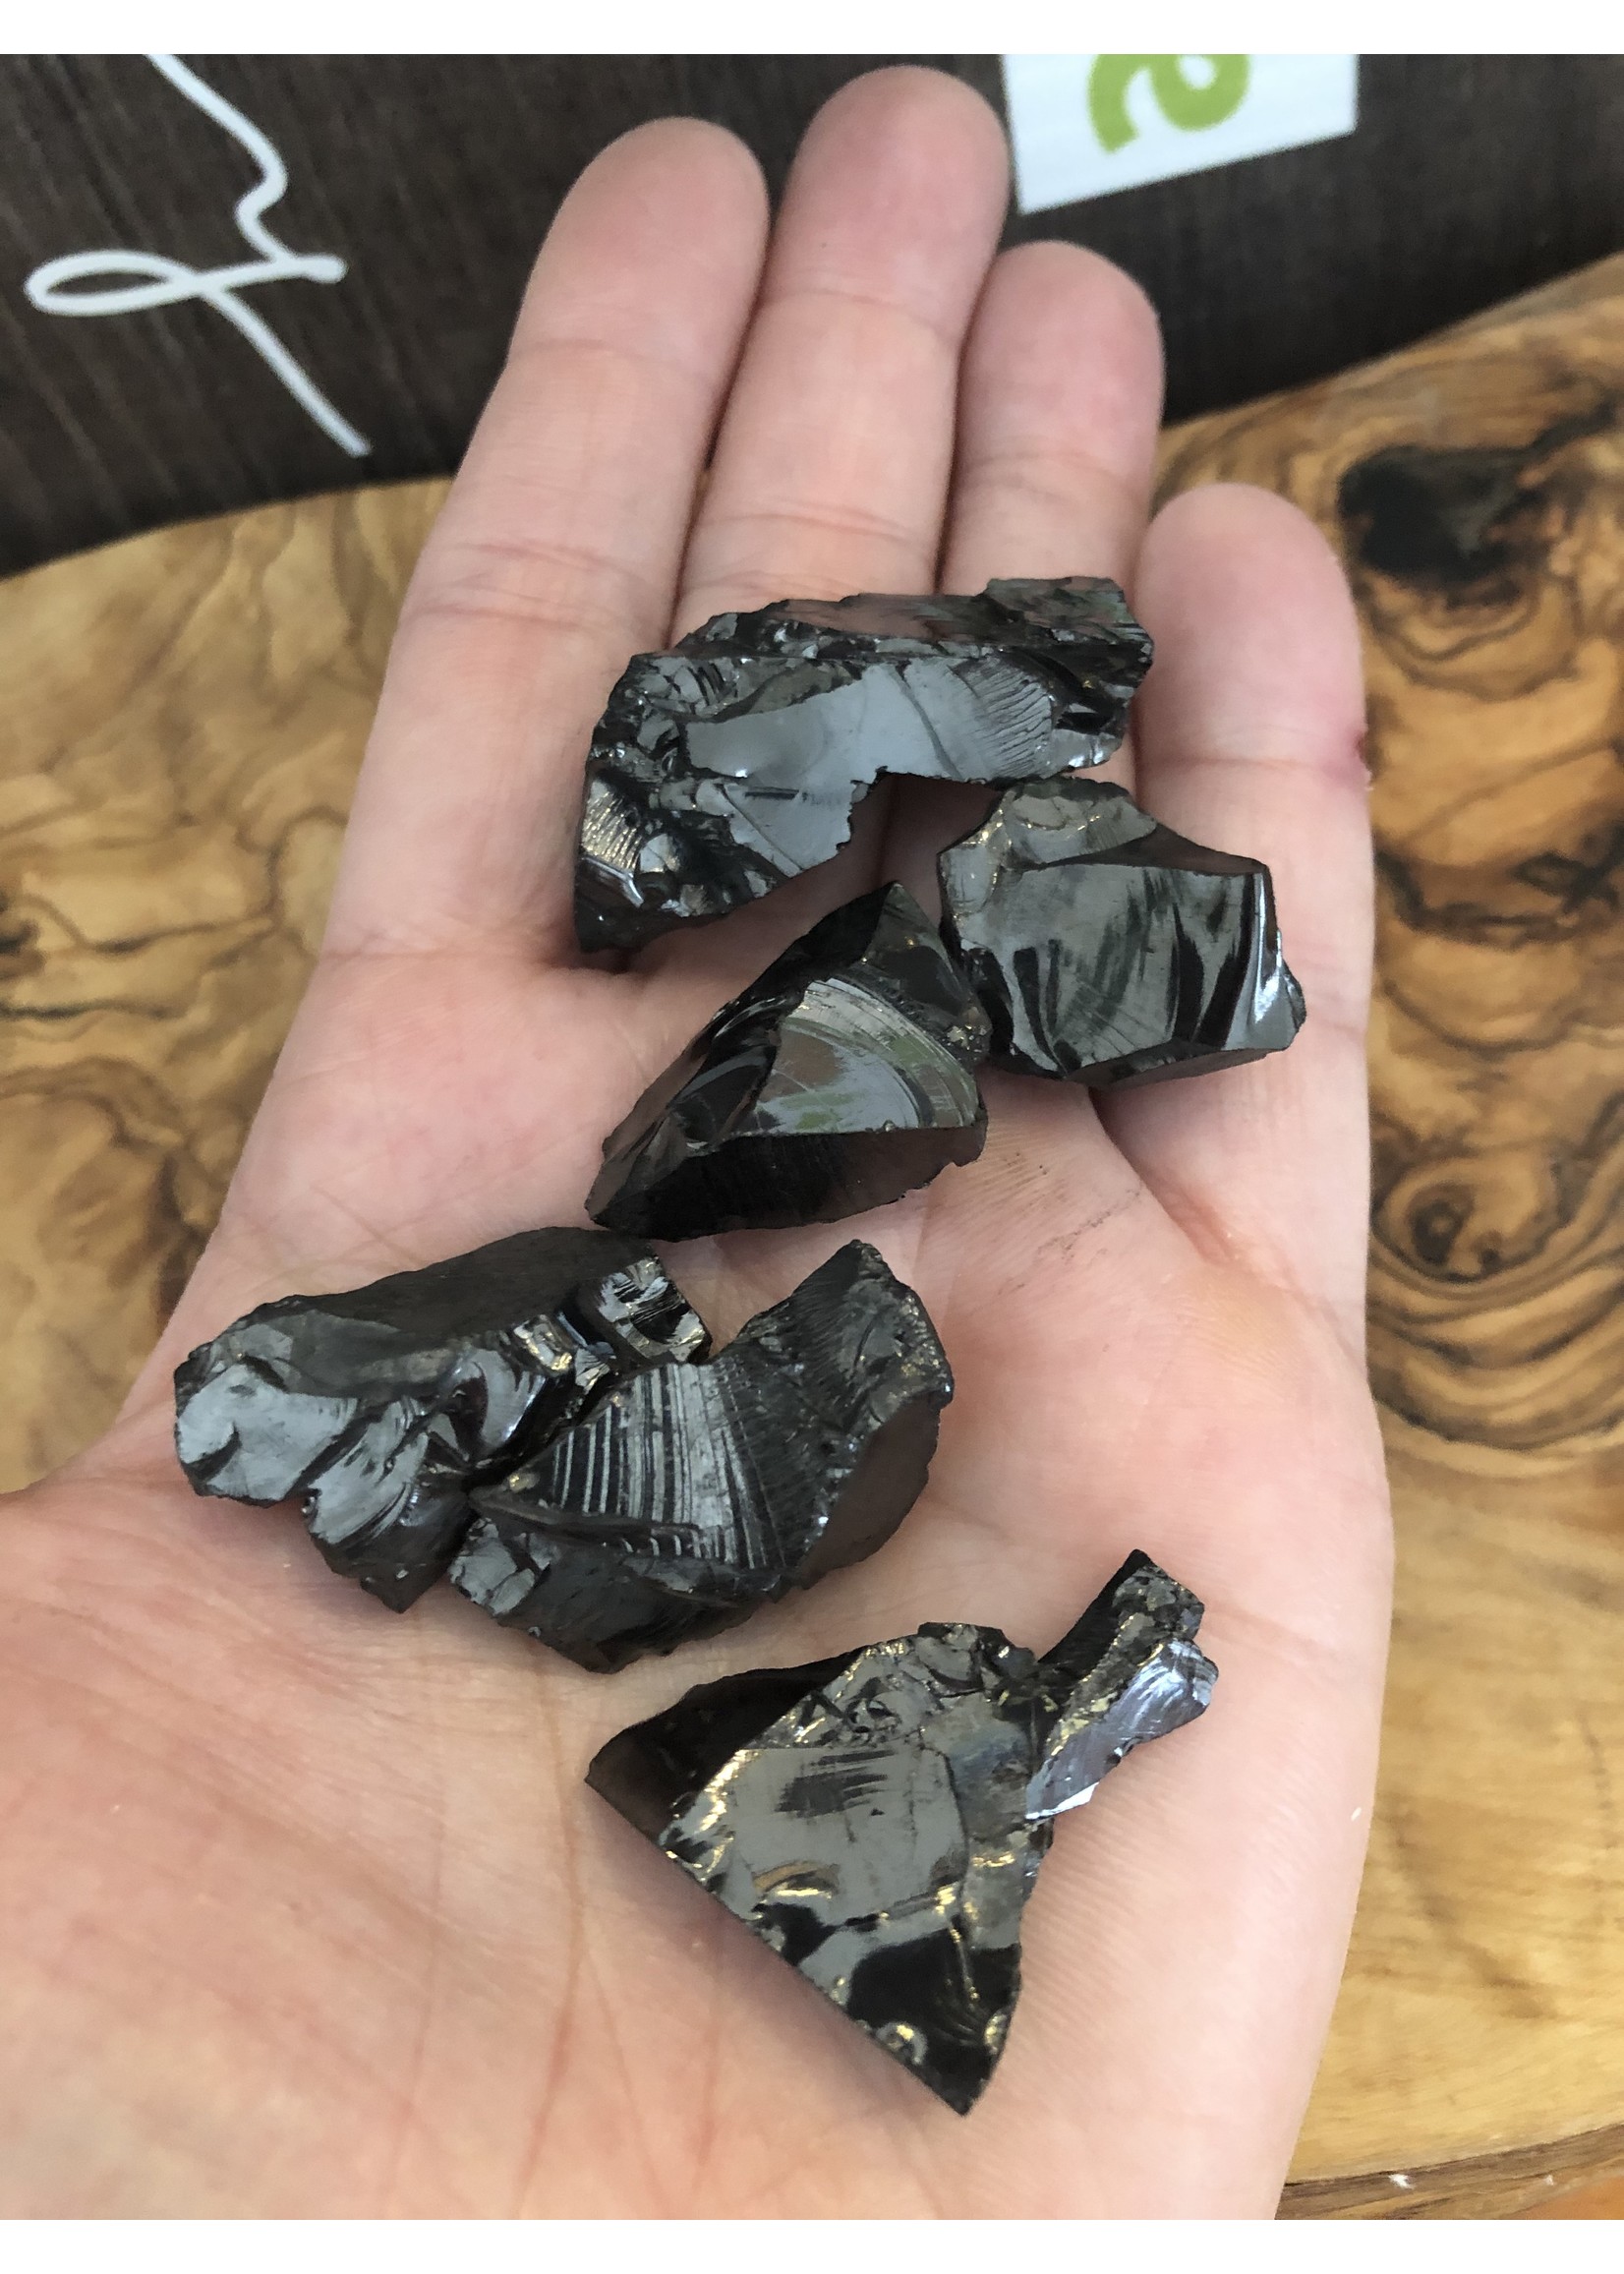 natural shungite elite, crystallized shungite has tenfold energy qualities compared to the "classic"